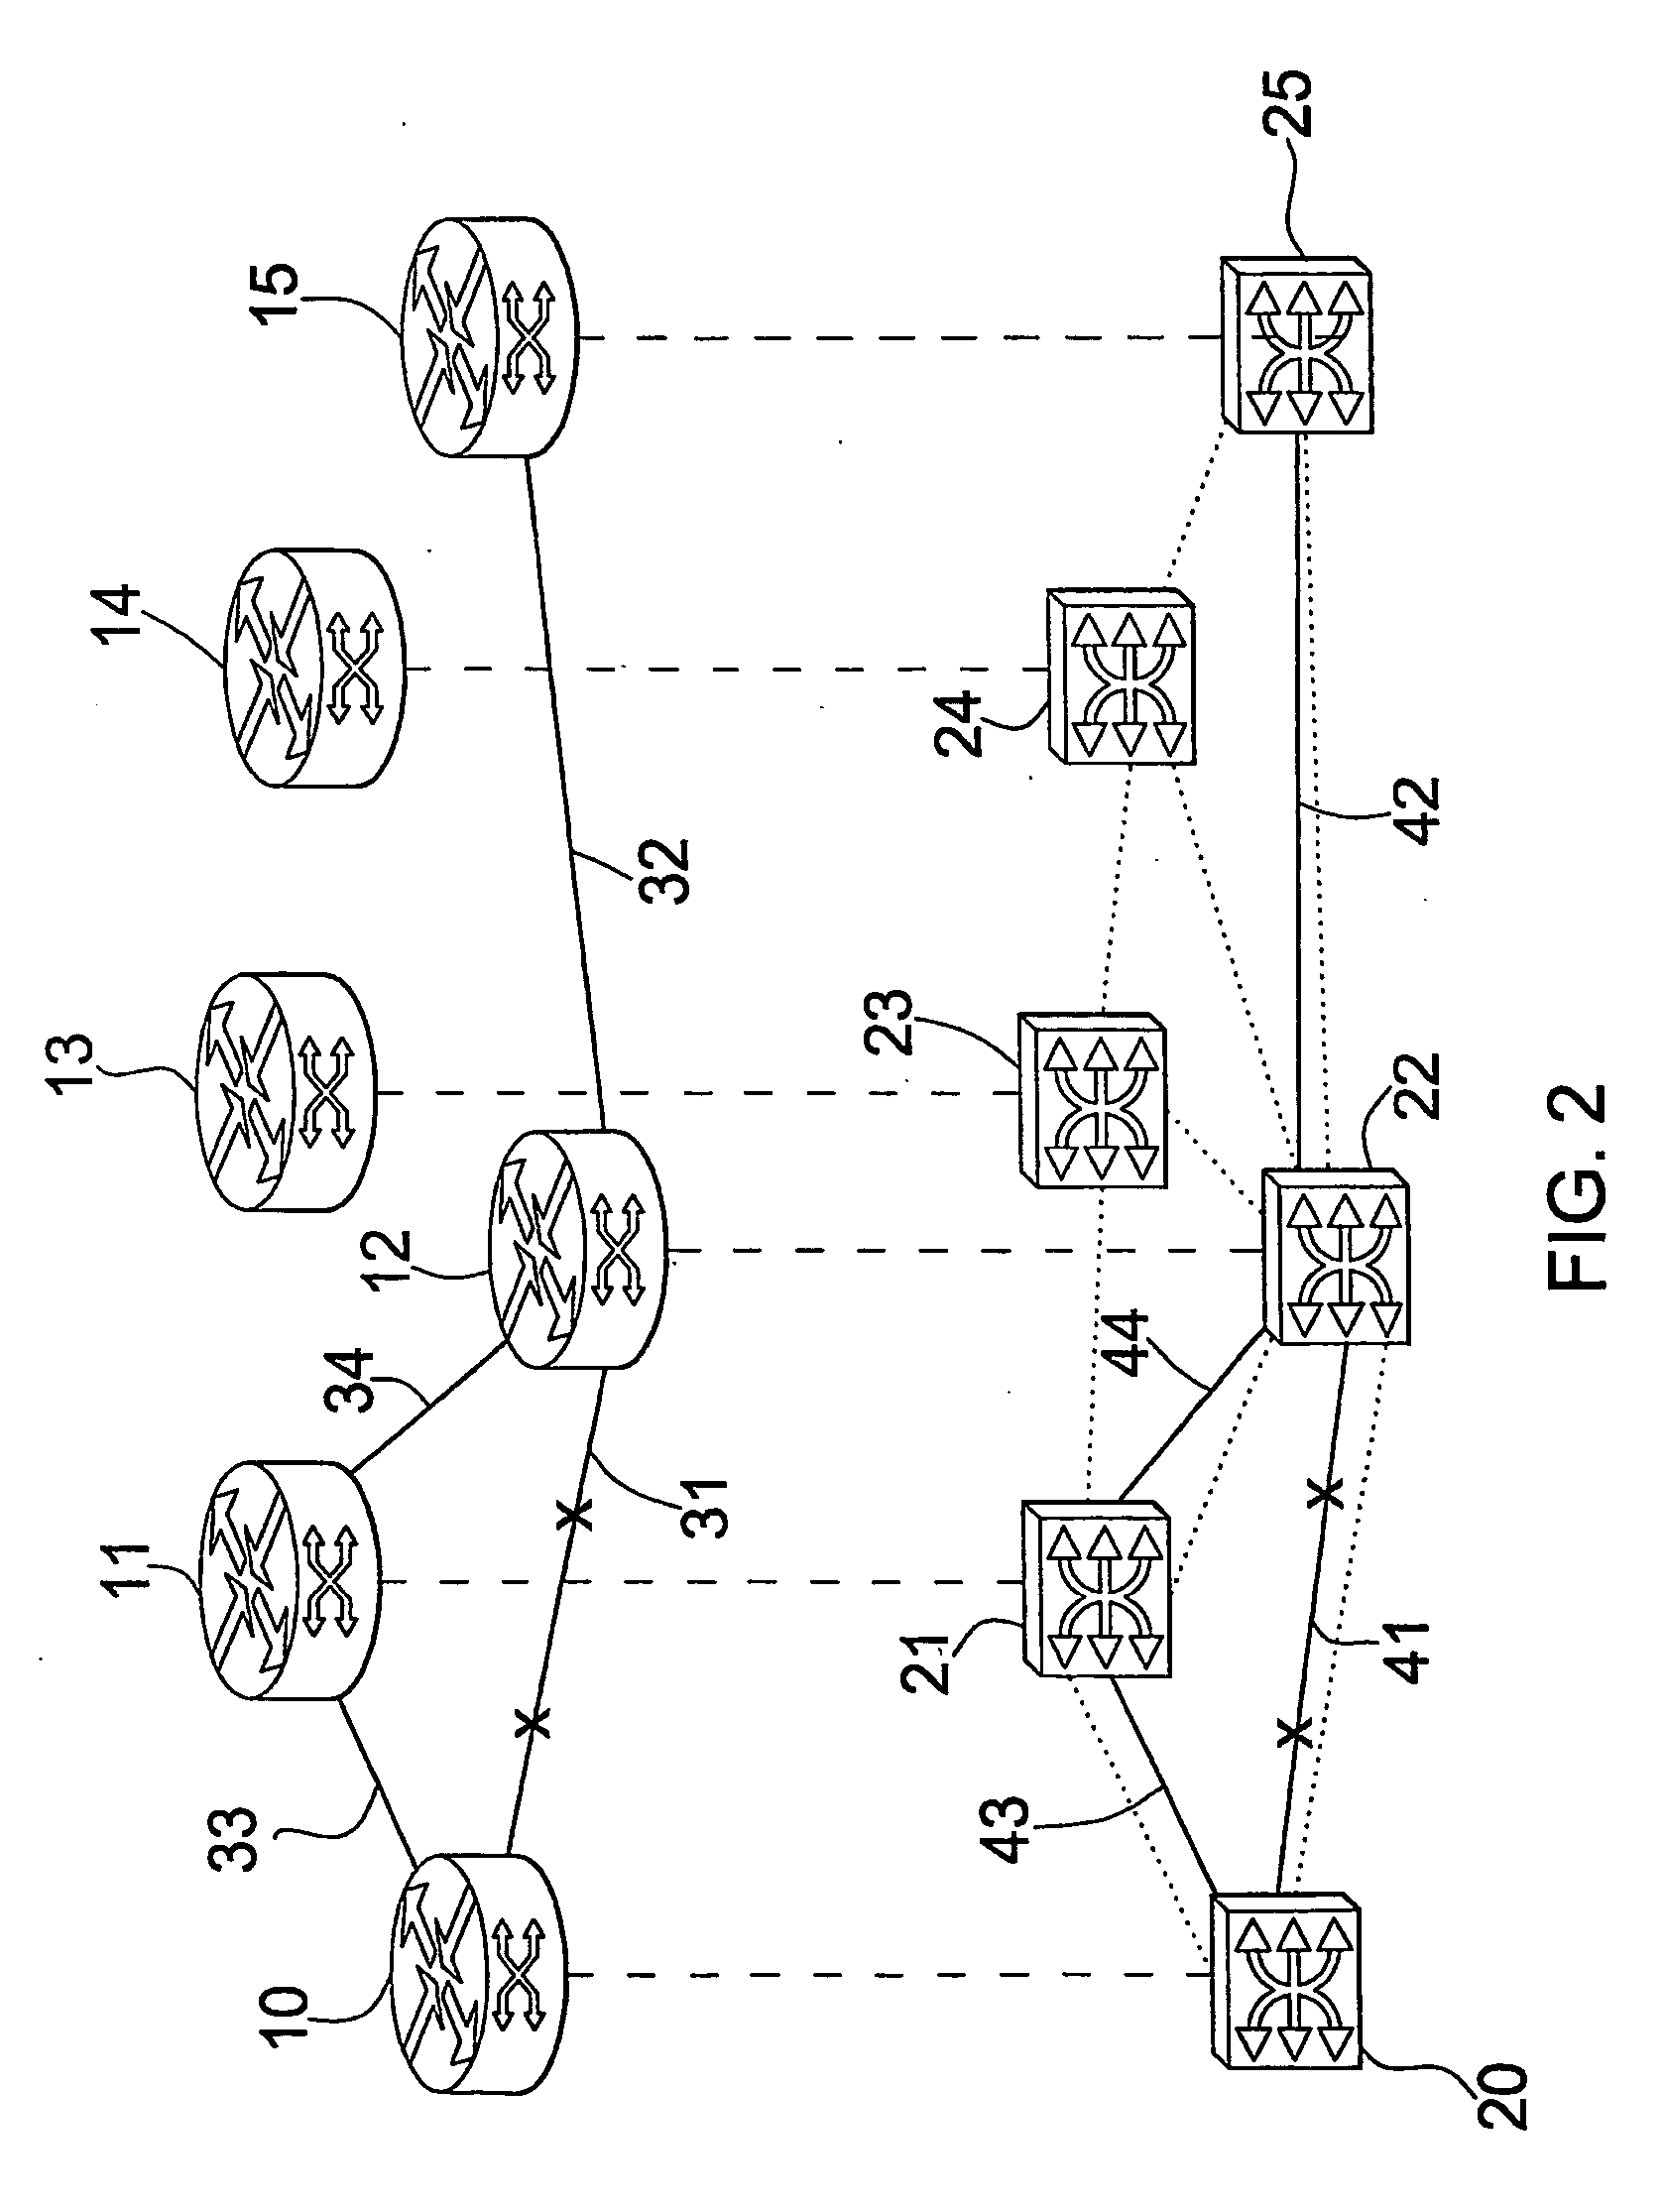 Dynamic routing in packet-switching multi-layer communications networks